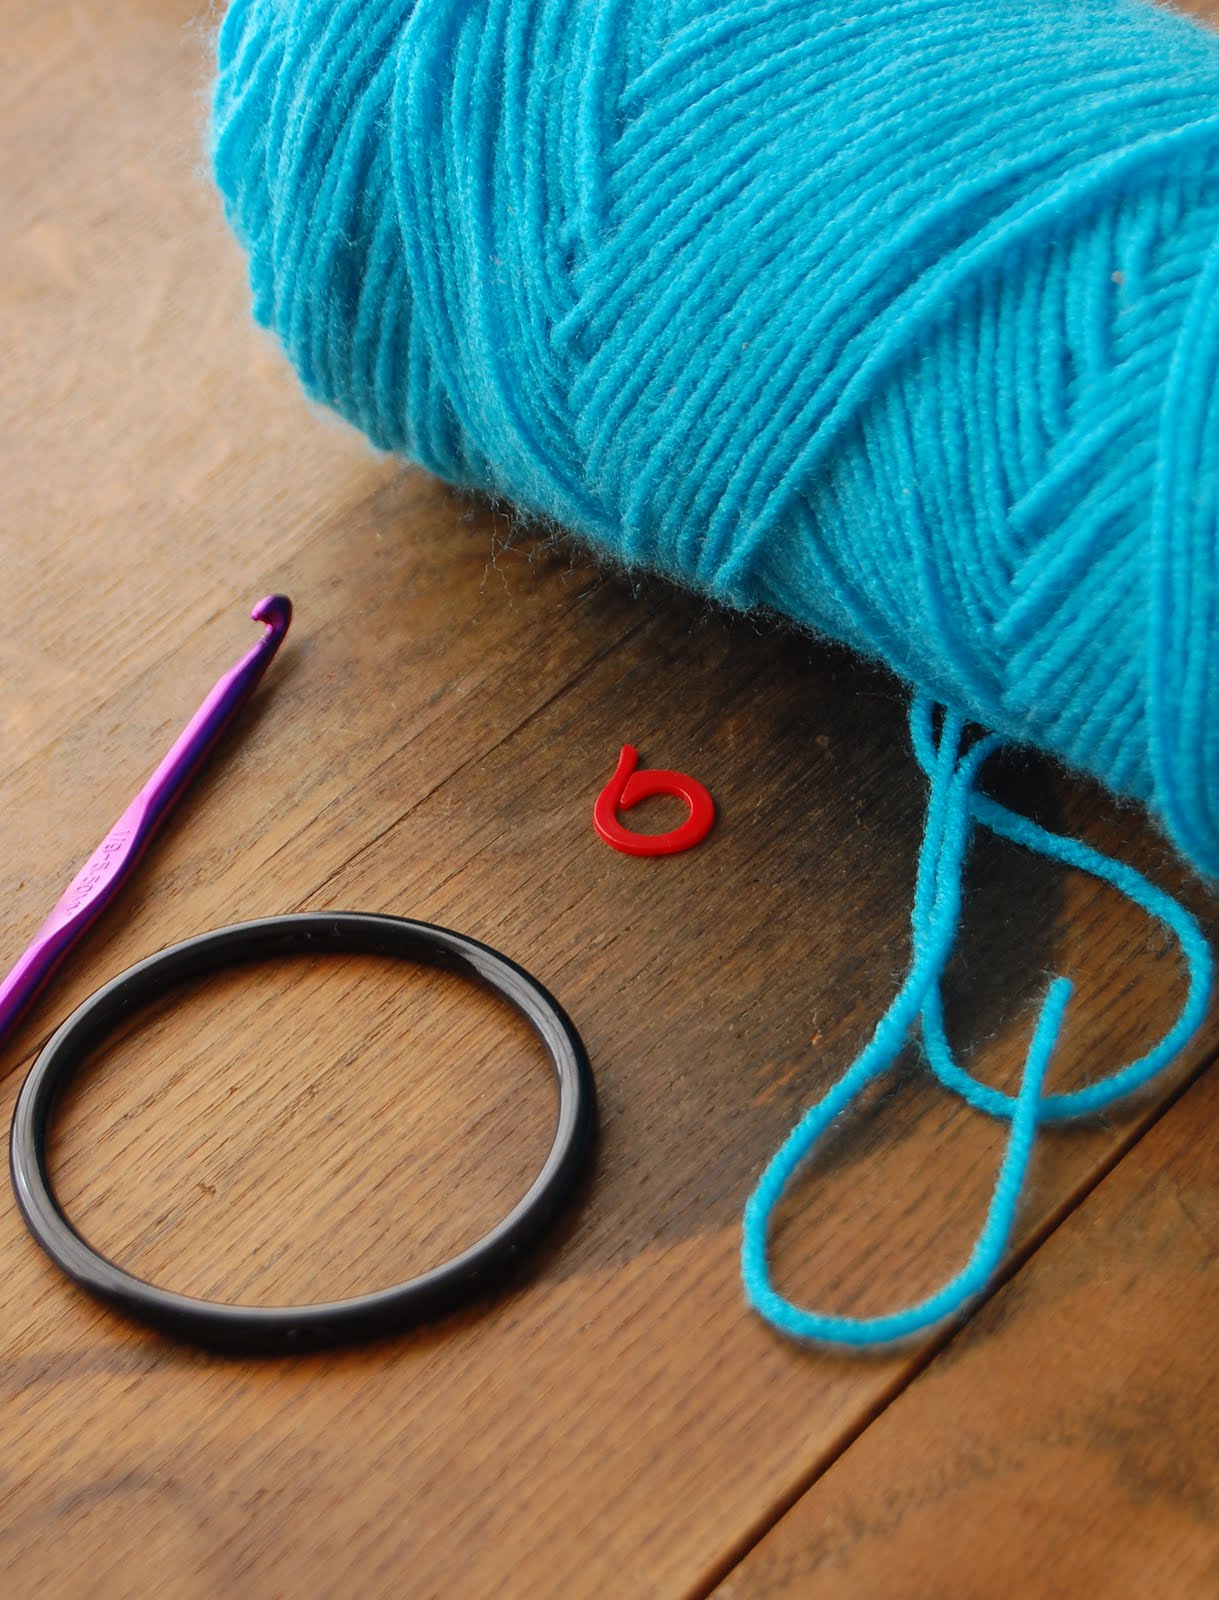 How to crochet around a plastic ring - Highland Hickory Designs - Tutorial